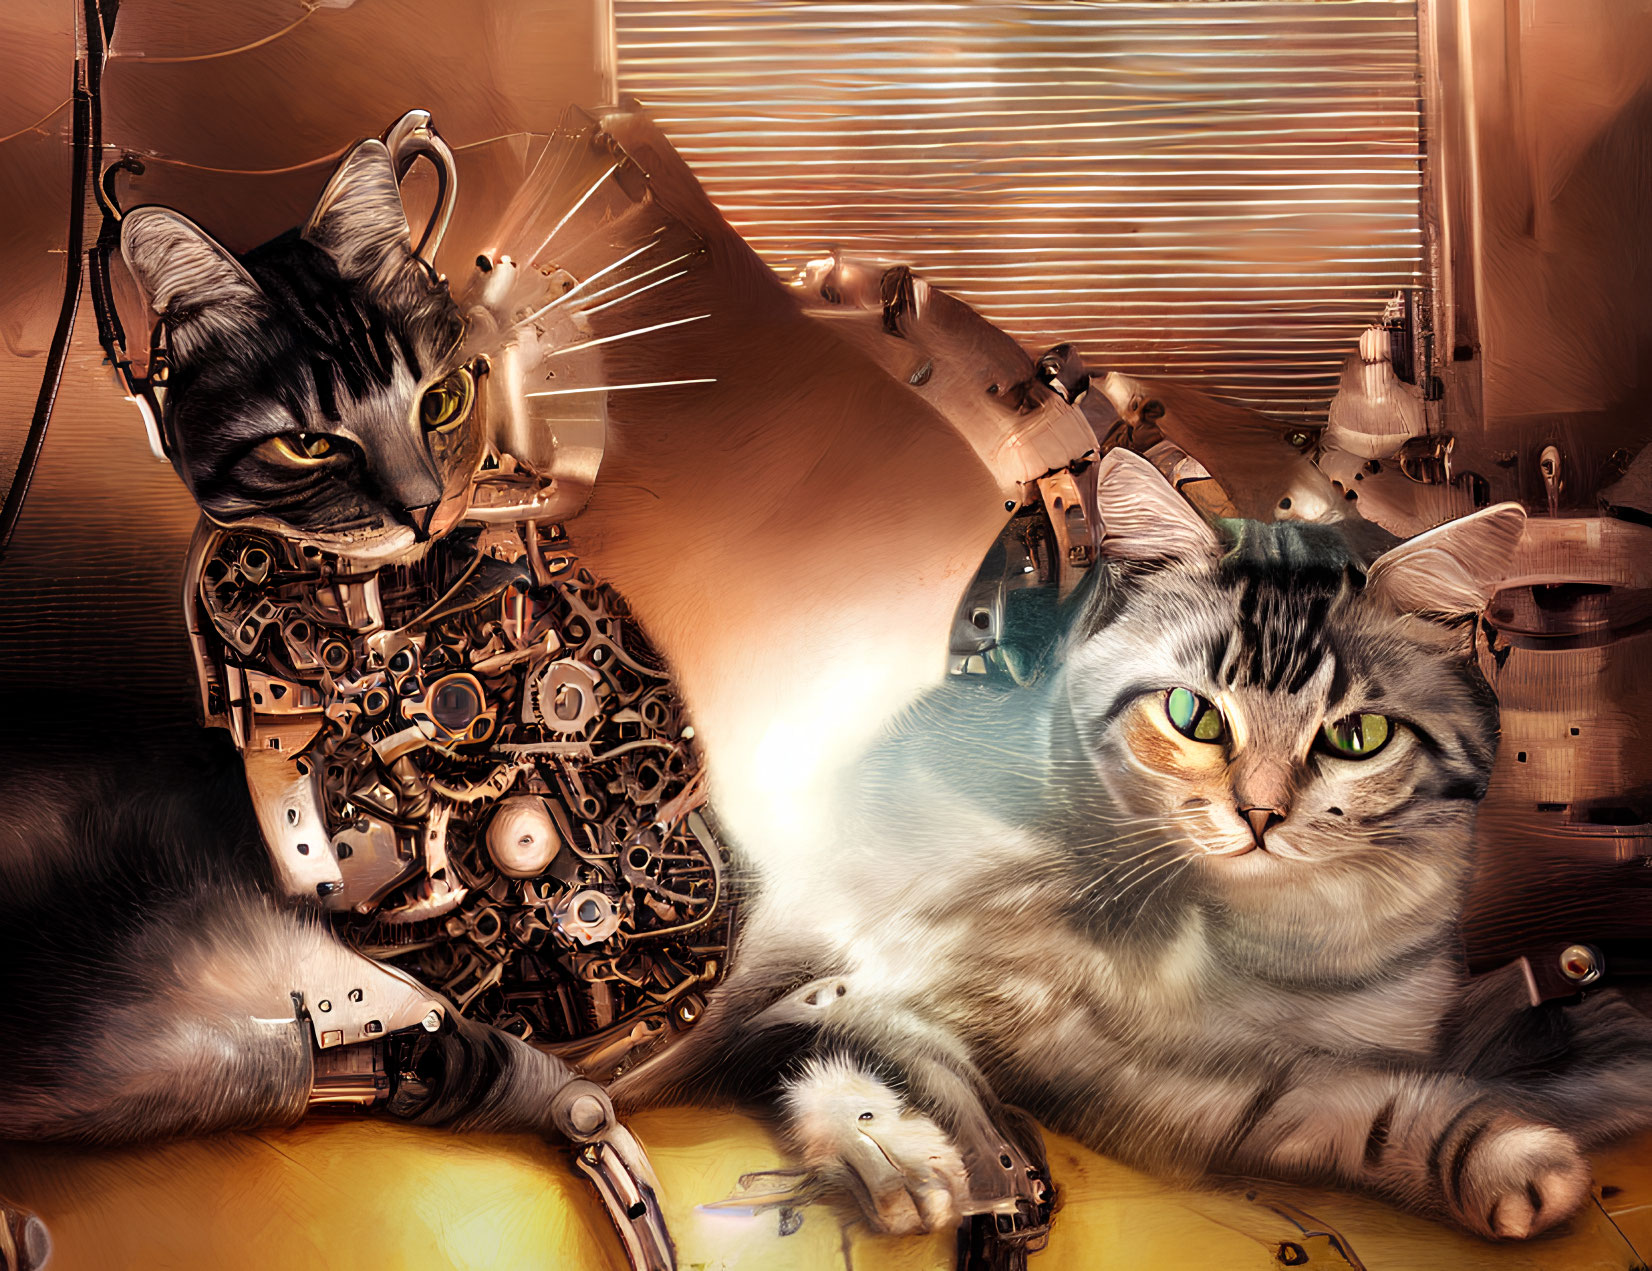 Digital artwork: Cat with visible mechanical innards next to a normal cat on warm-toned background with